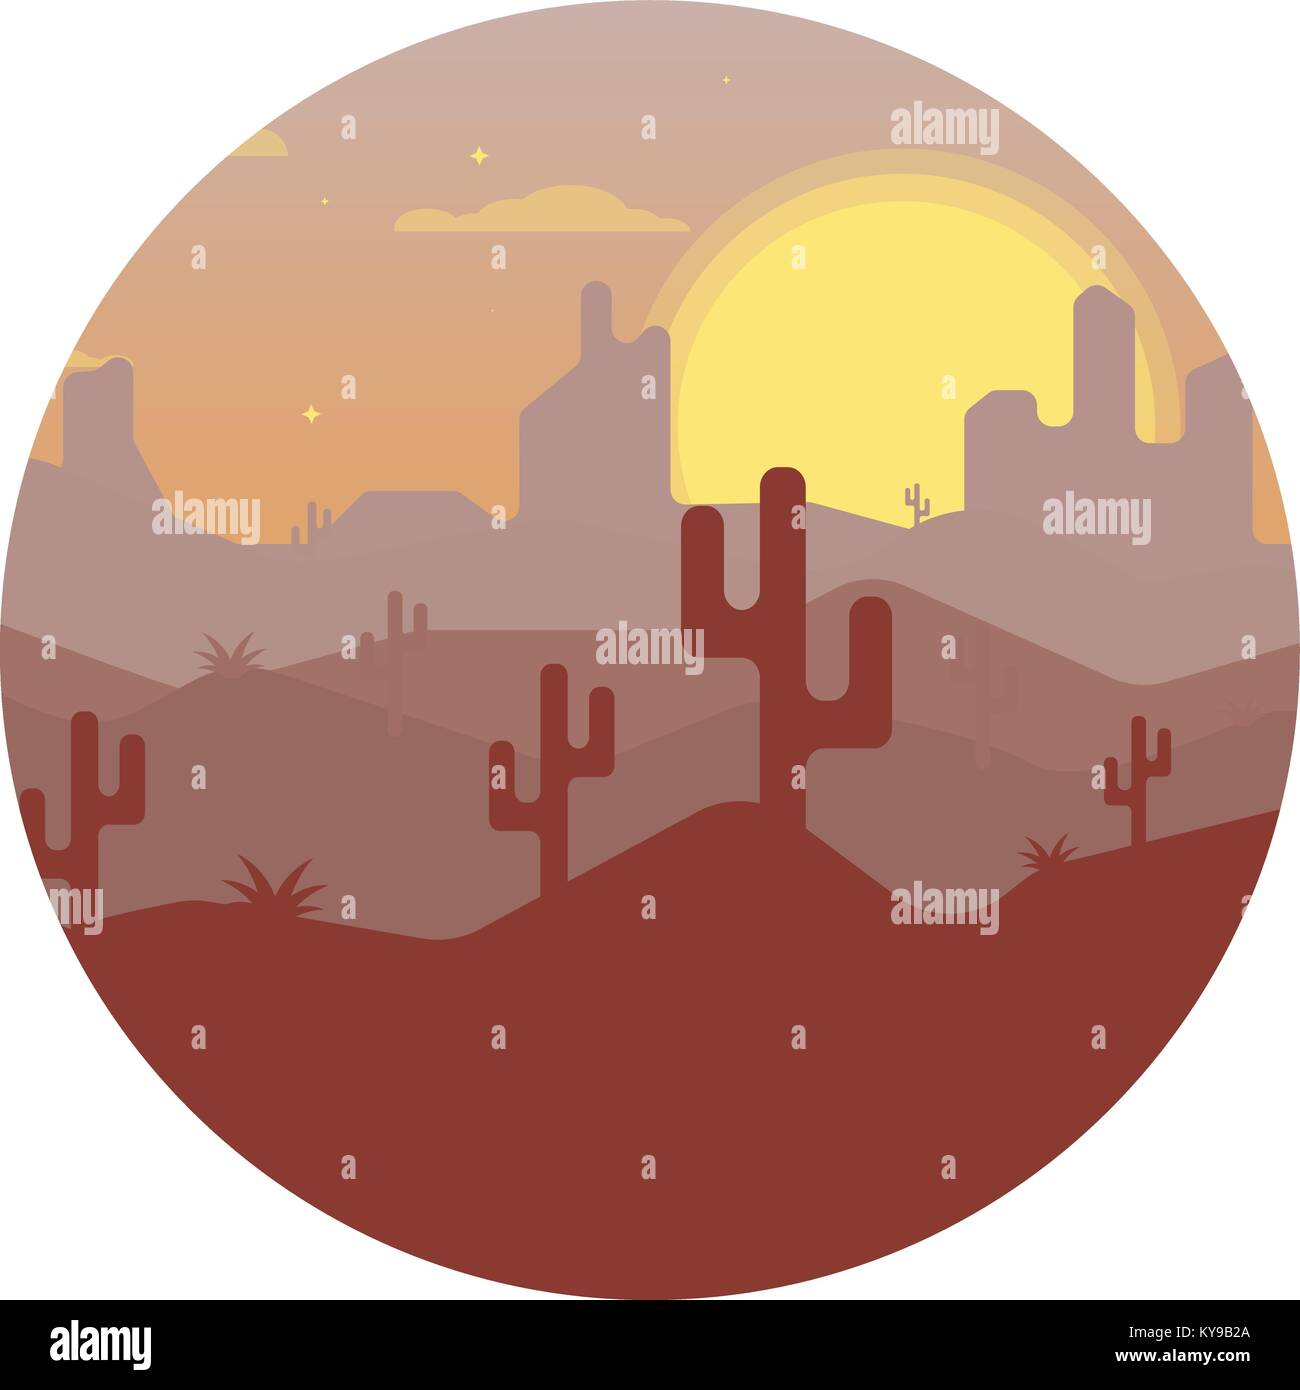 Landscape design of the desert with cacti Stock Vector